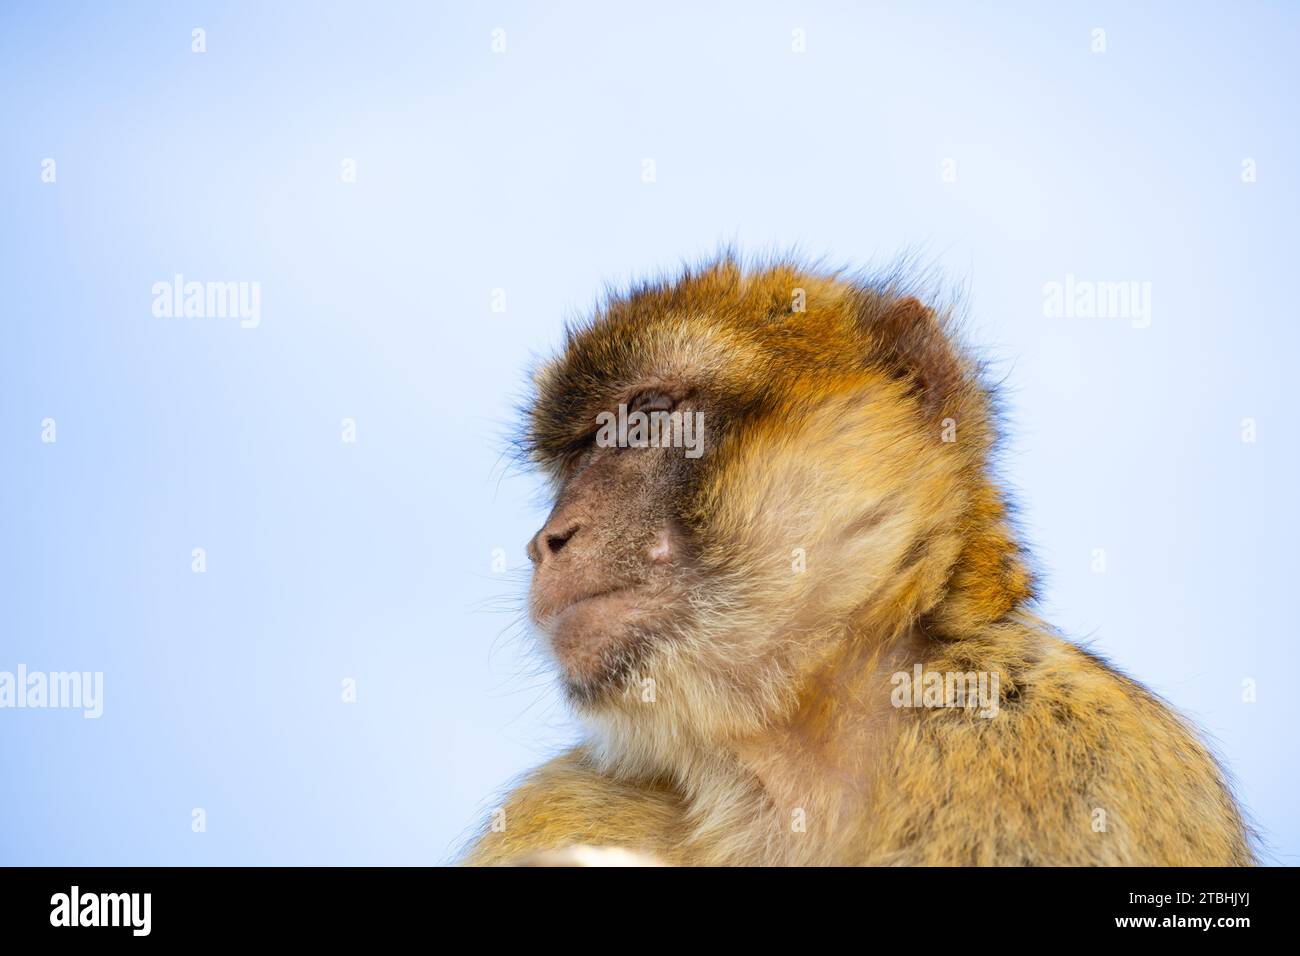 The famous Barbary Macaque of the British Overseas Territory of Gibraltar, the Rock of Gibraltar on the Iberian Peninsula. Stock Photo